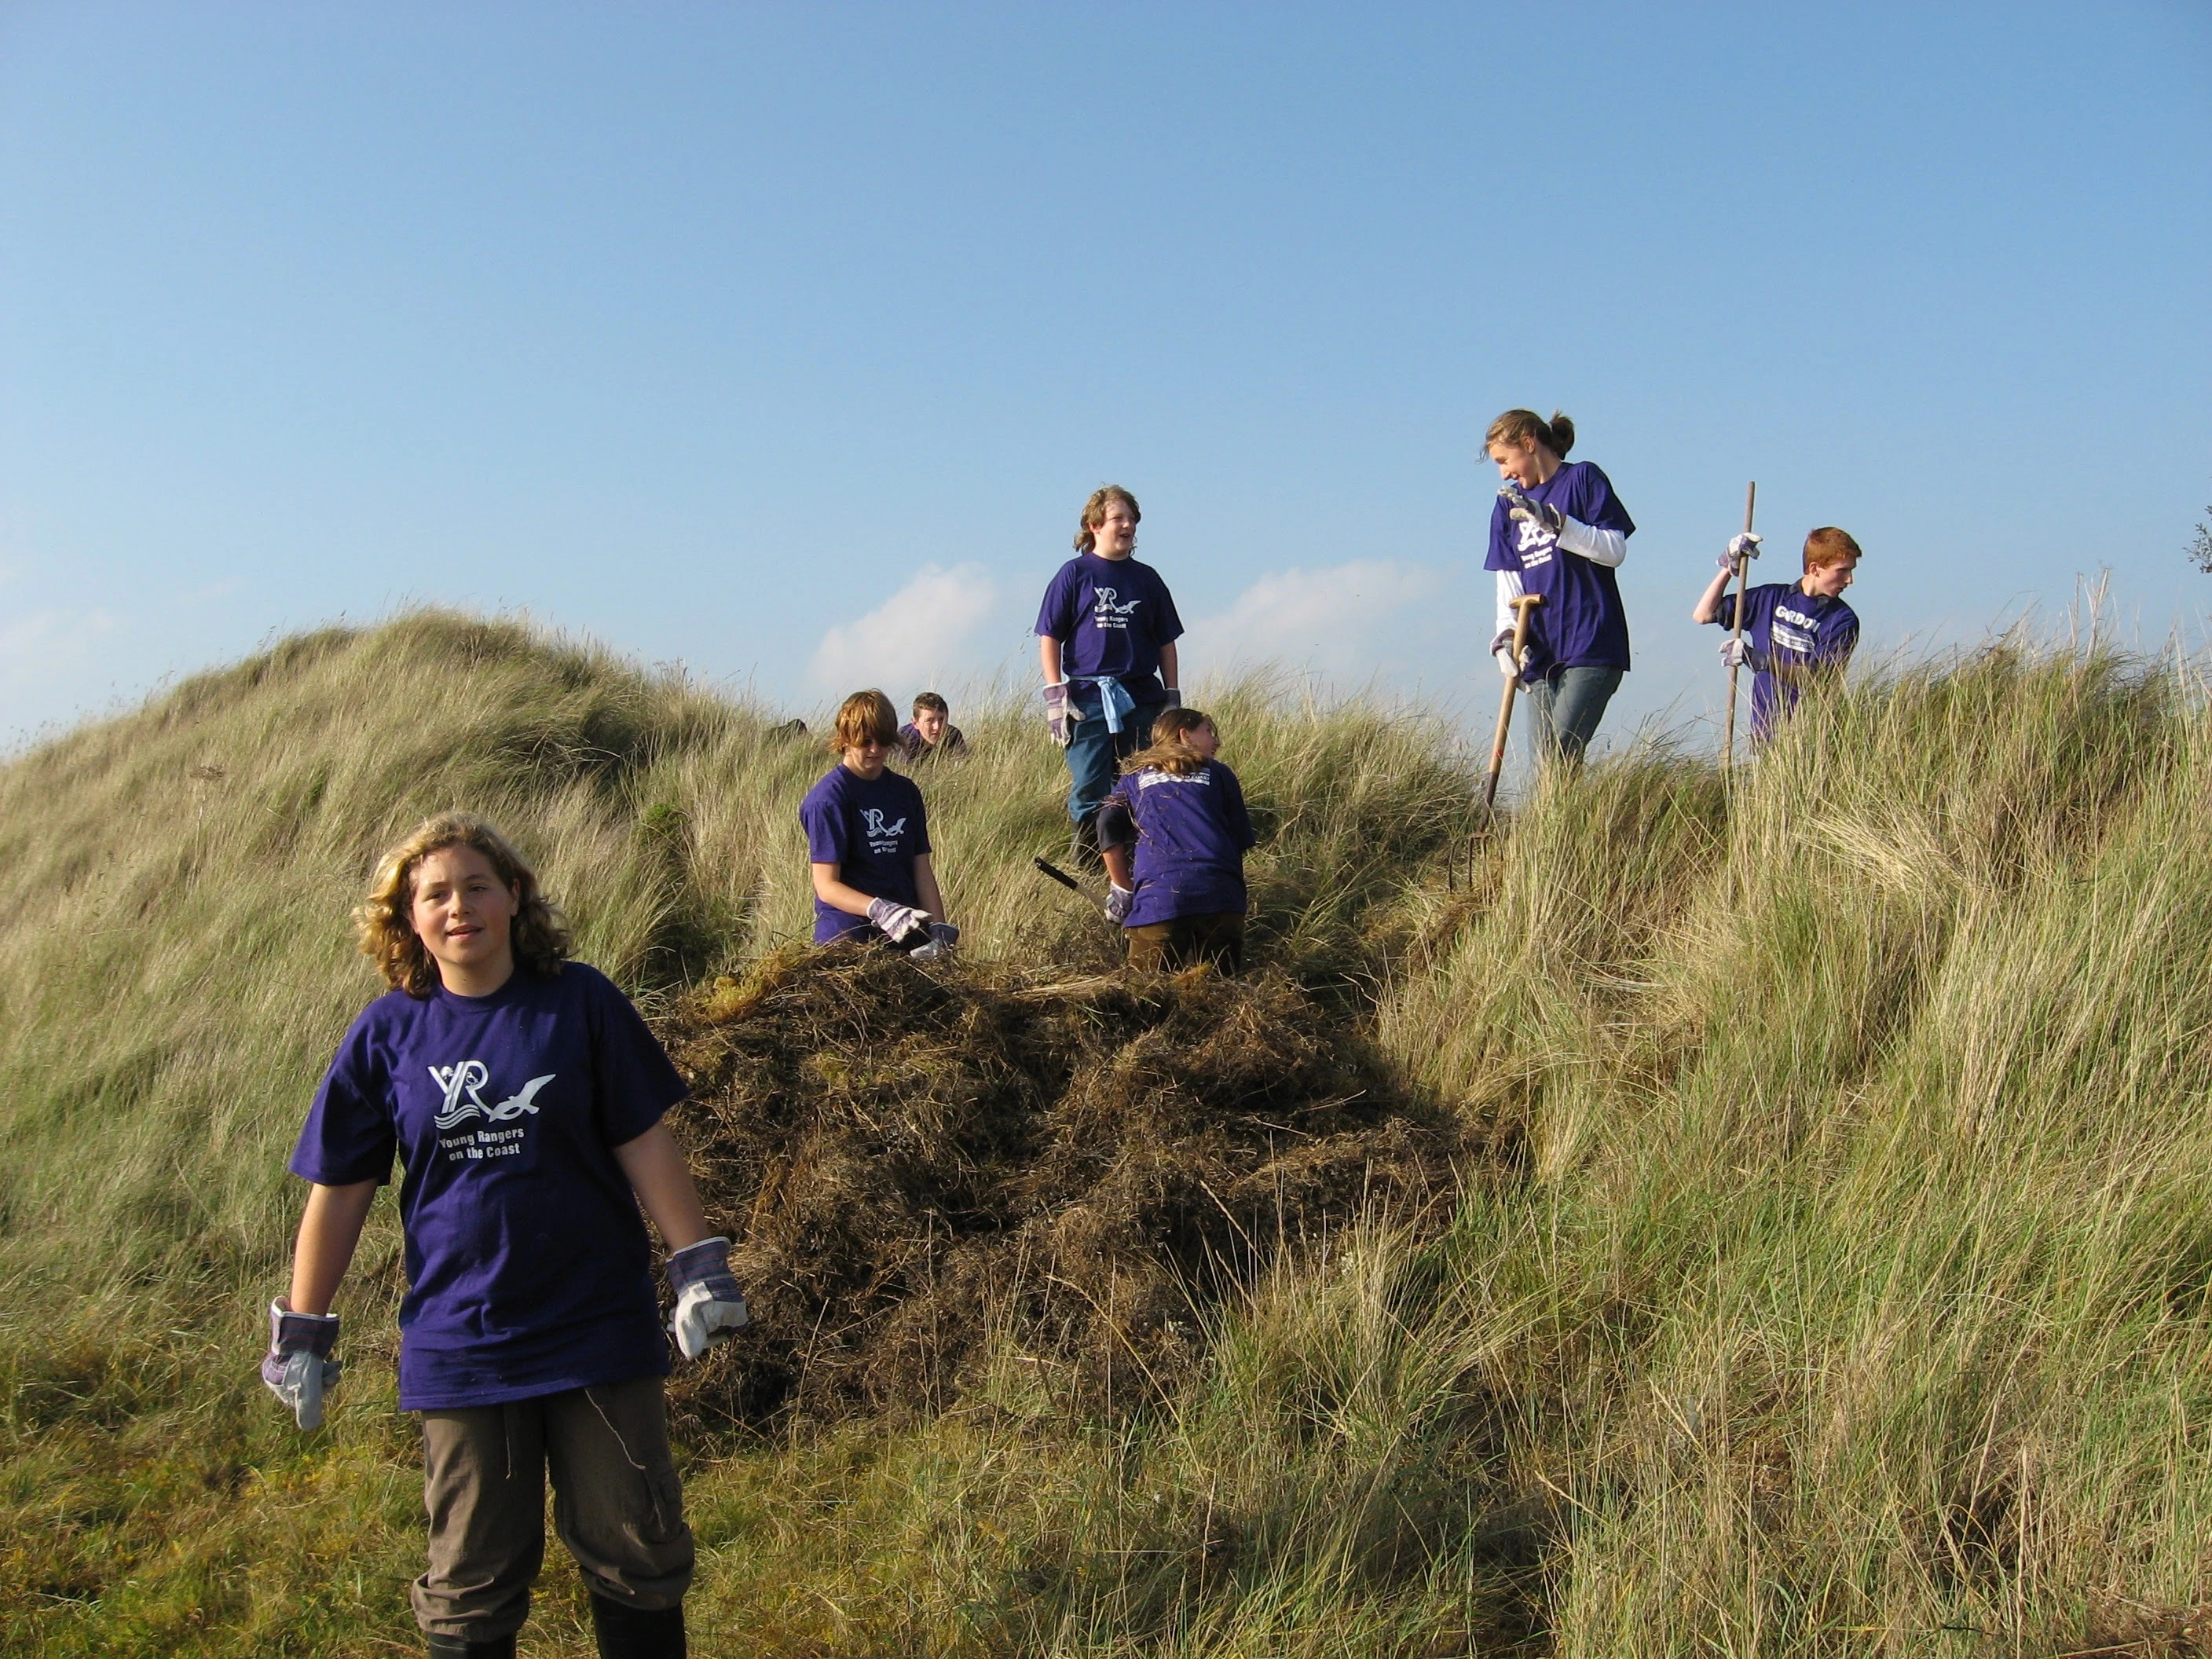 Previous Young Rangers assisting with dune management